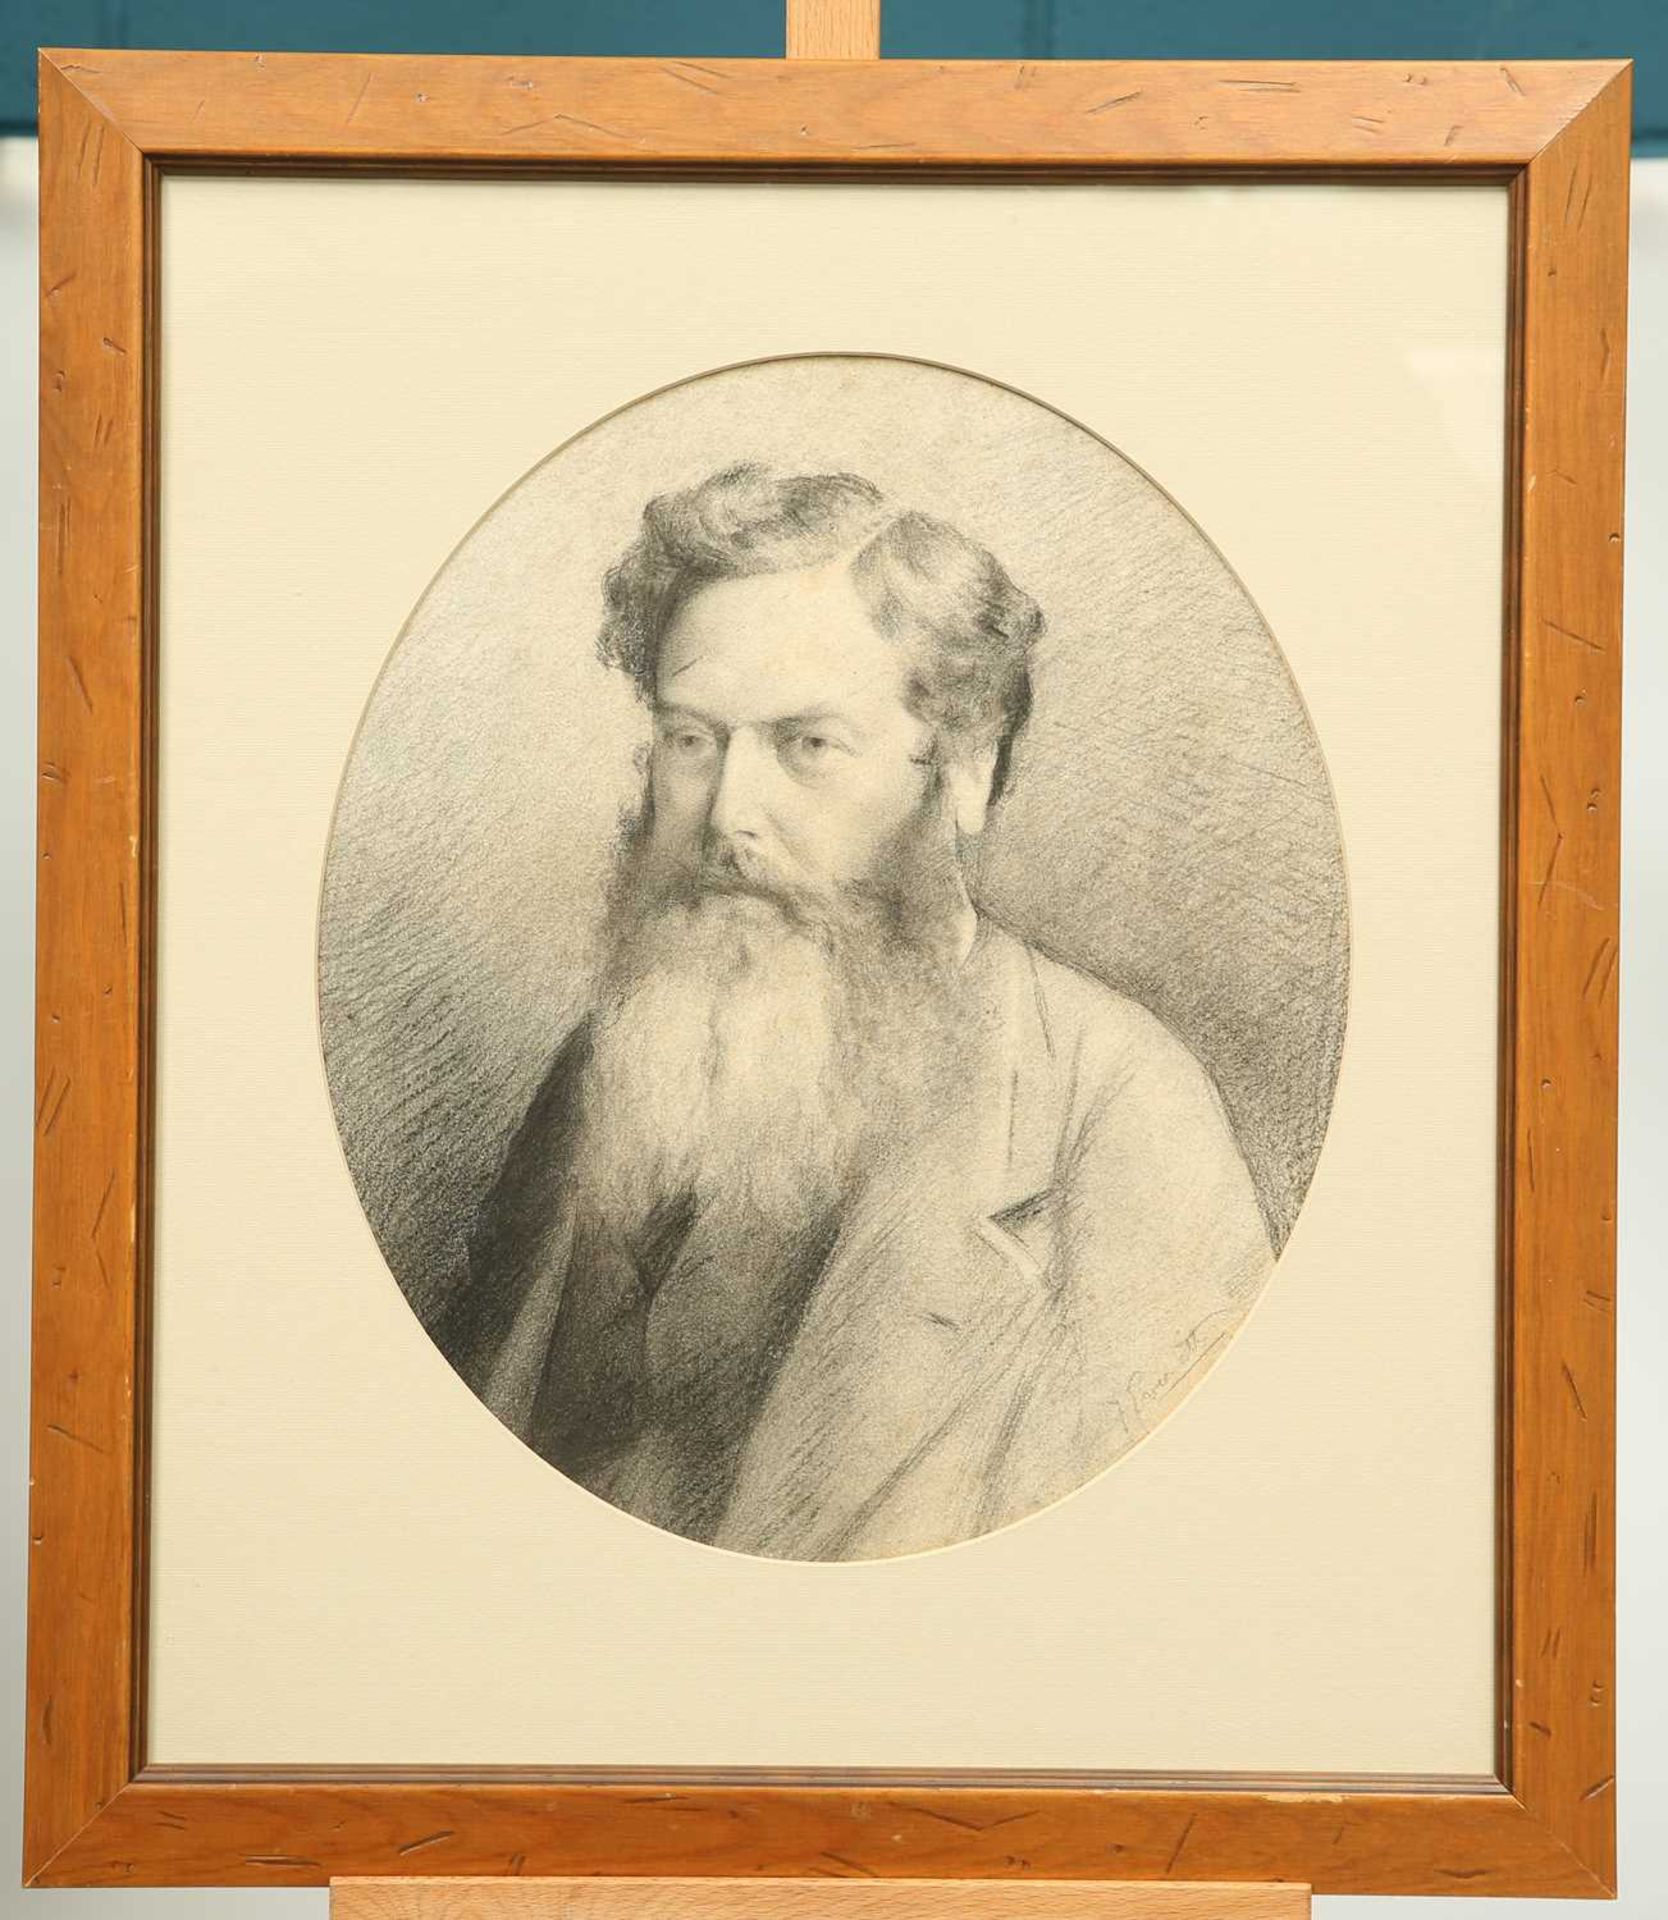 19TH CENTURY ENGLISH SCHOOL PORTRAIT OF A MAN, POSSIBLY WILLIAM MORRIS - Image 2 of 2